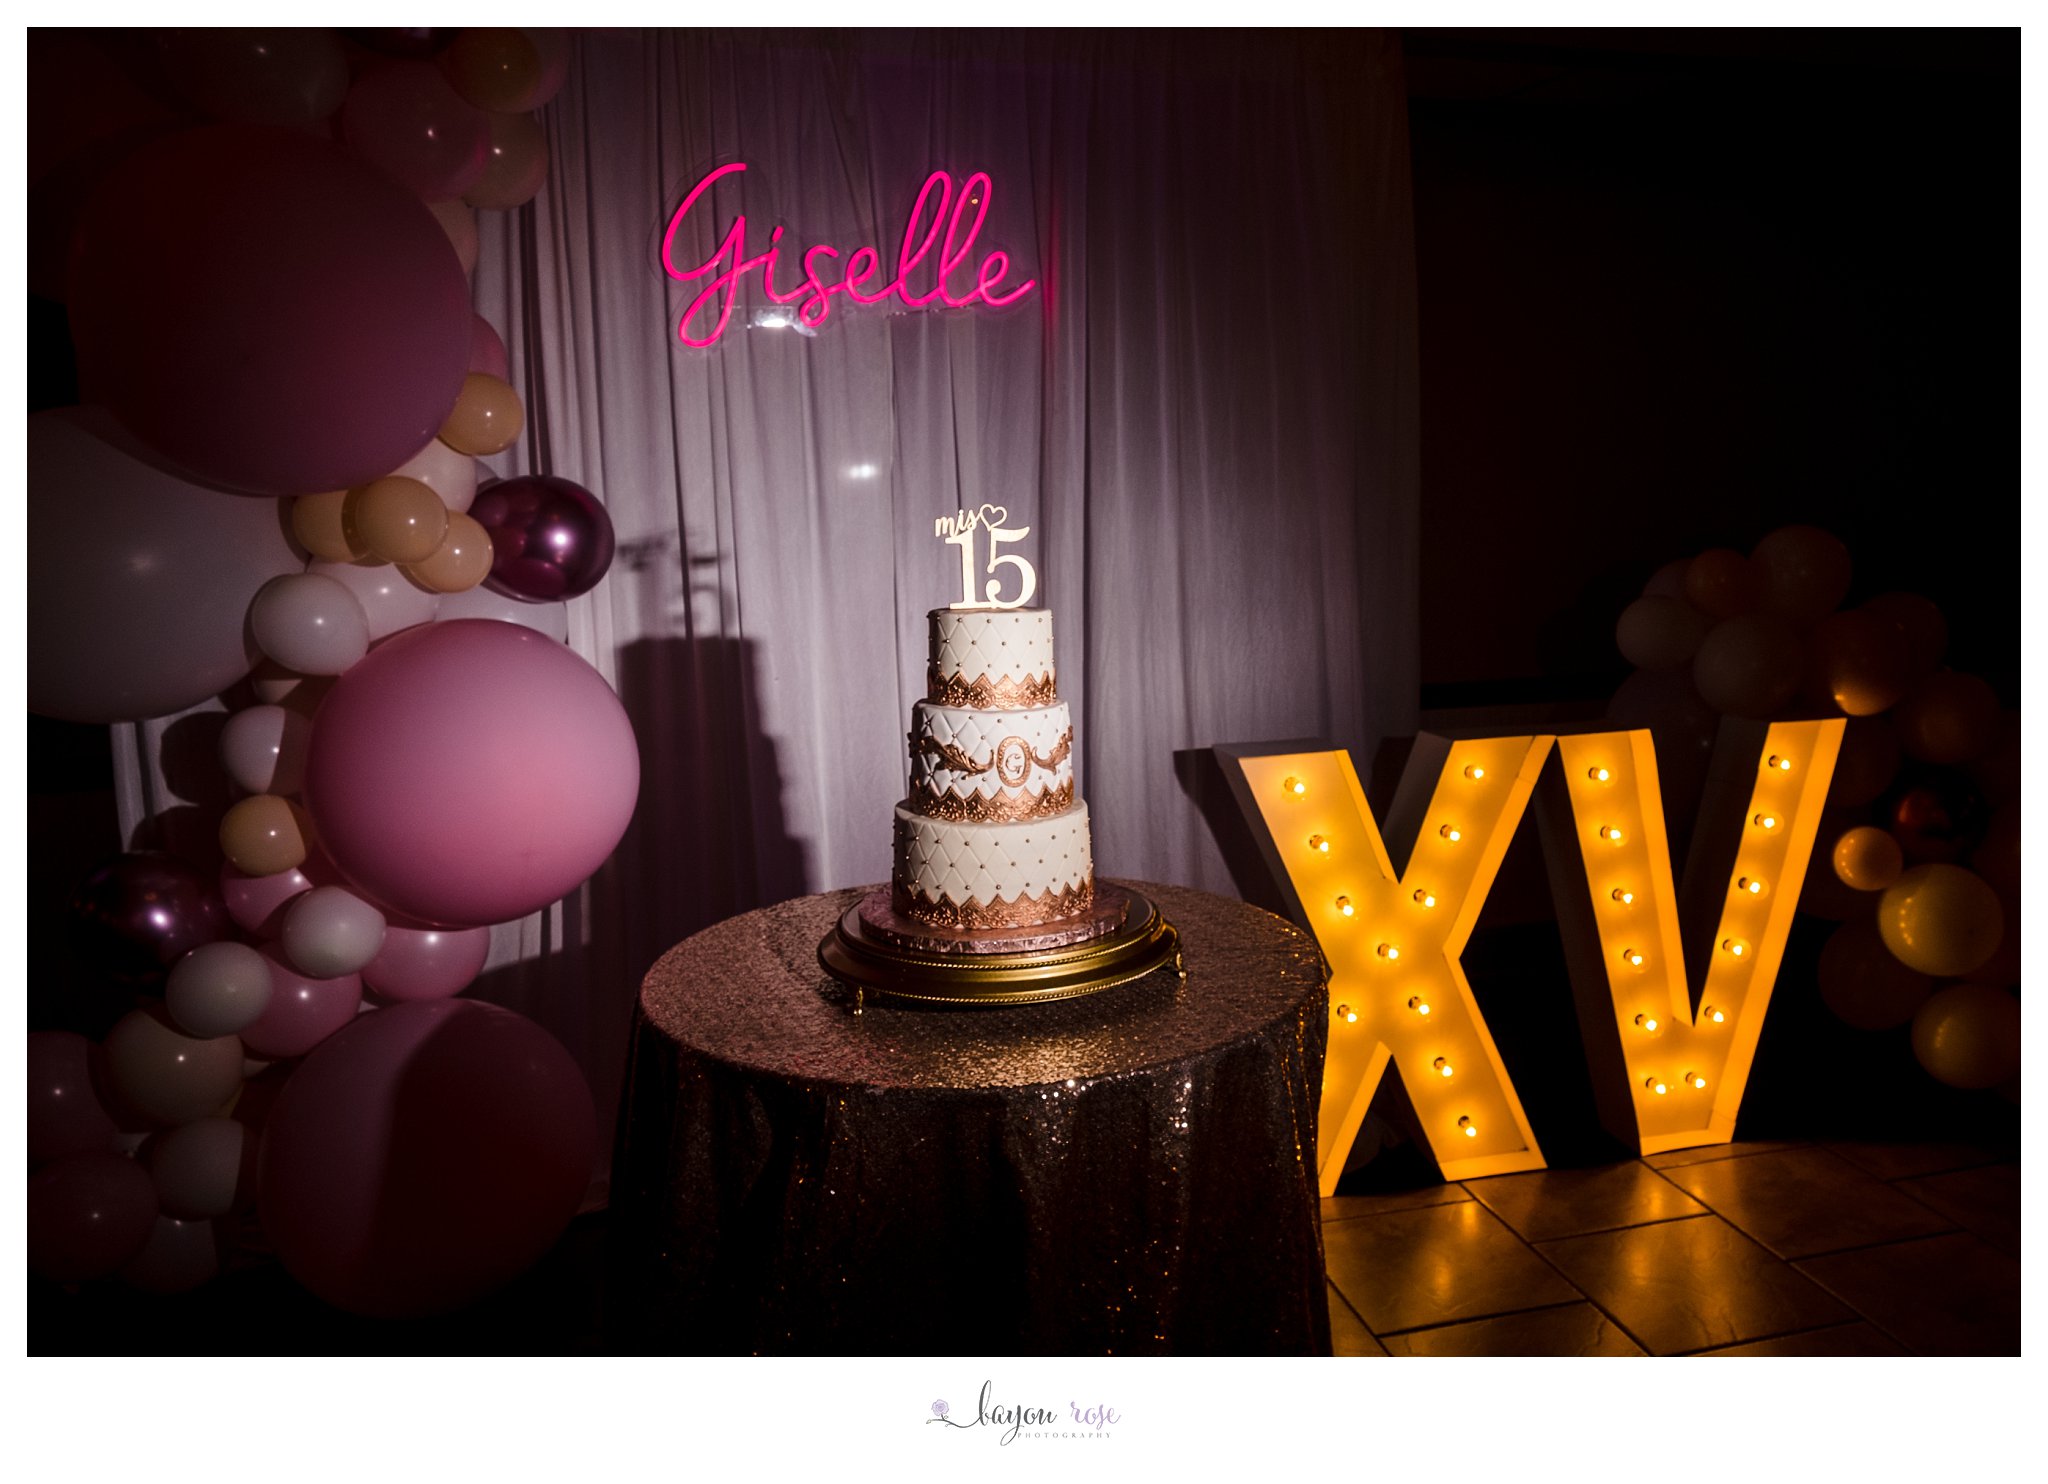 Quinceanera cake, with the birthday girl's name up in lights behind it